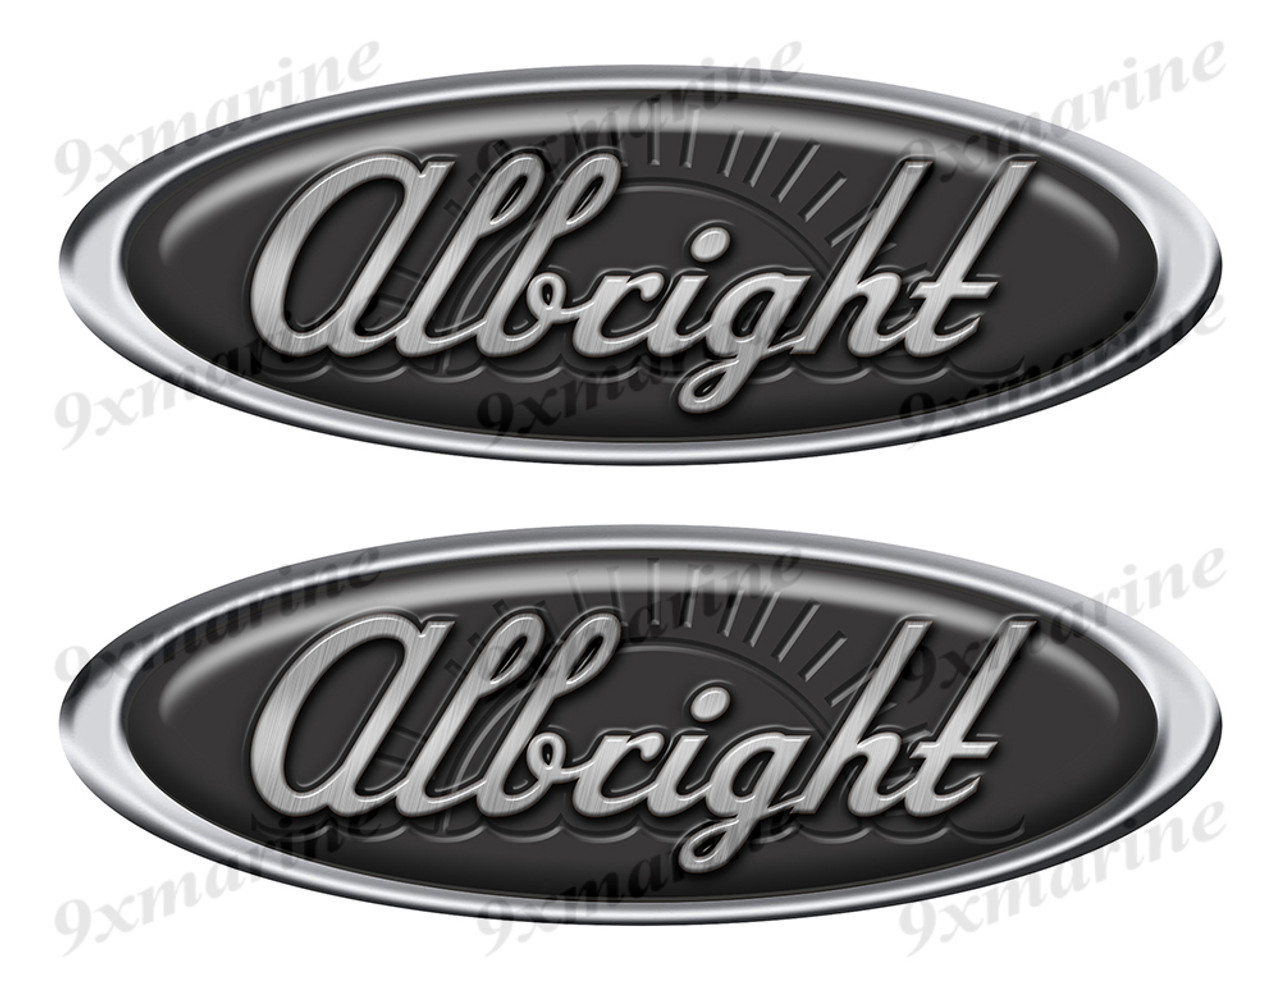 Two Albright Classic Oval Stickers 10" long